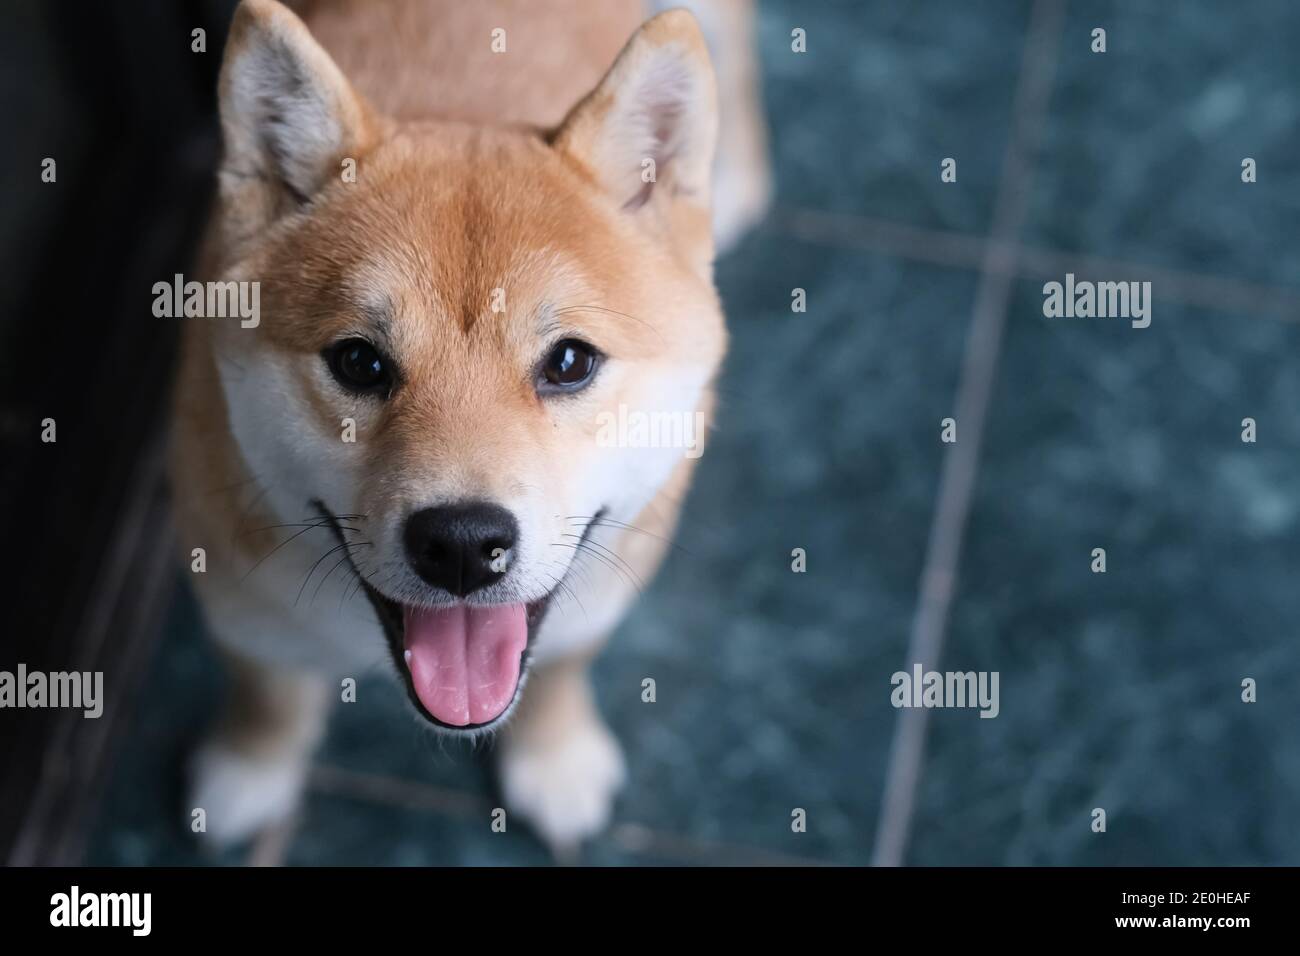 close up one quiet Shiba Inu dog sticking tongue out and looking at camera Stock Photo